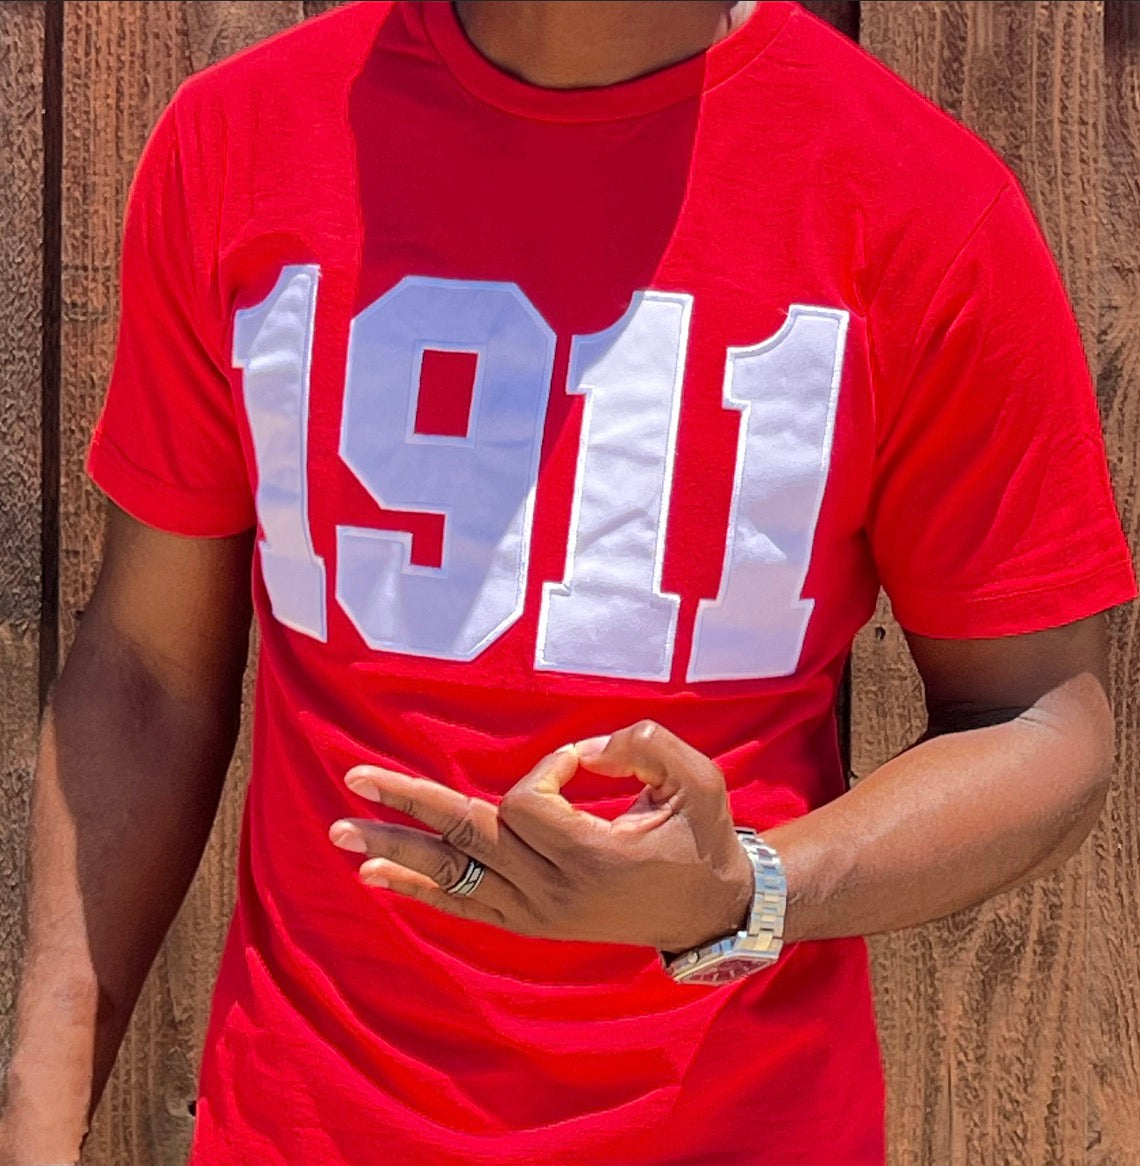 Nupe Kave Exclusive Kappa Alpha Psi Double Stitched Appliqué Embroidery Lettered T-shirt . This is the perfect short-sleeved shirt to wear while showing off your Kappa Alpha Psi fraternity lettering. A comfortable 100% cotton tee with a twill Greek letters embroidery across the chest give you the perfect fit. This shirt is also a perfect gift for your favorite Kappa Man. 